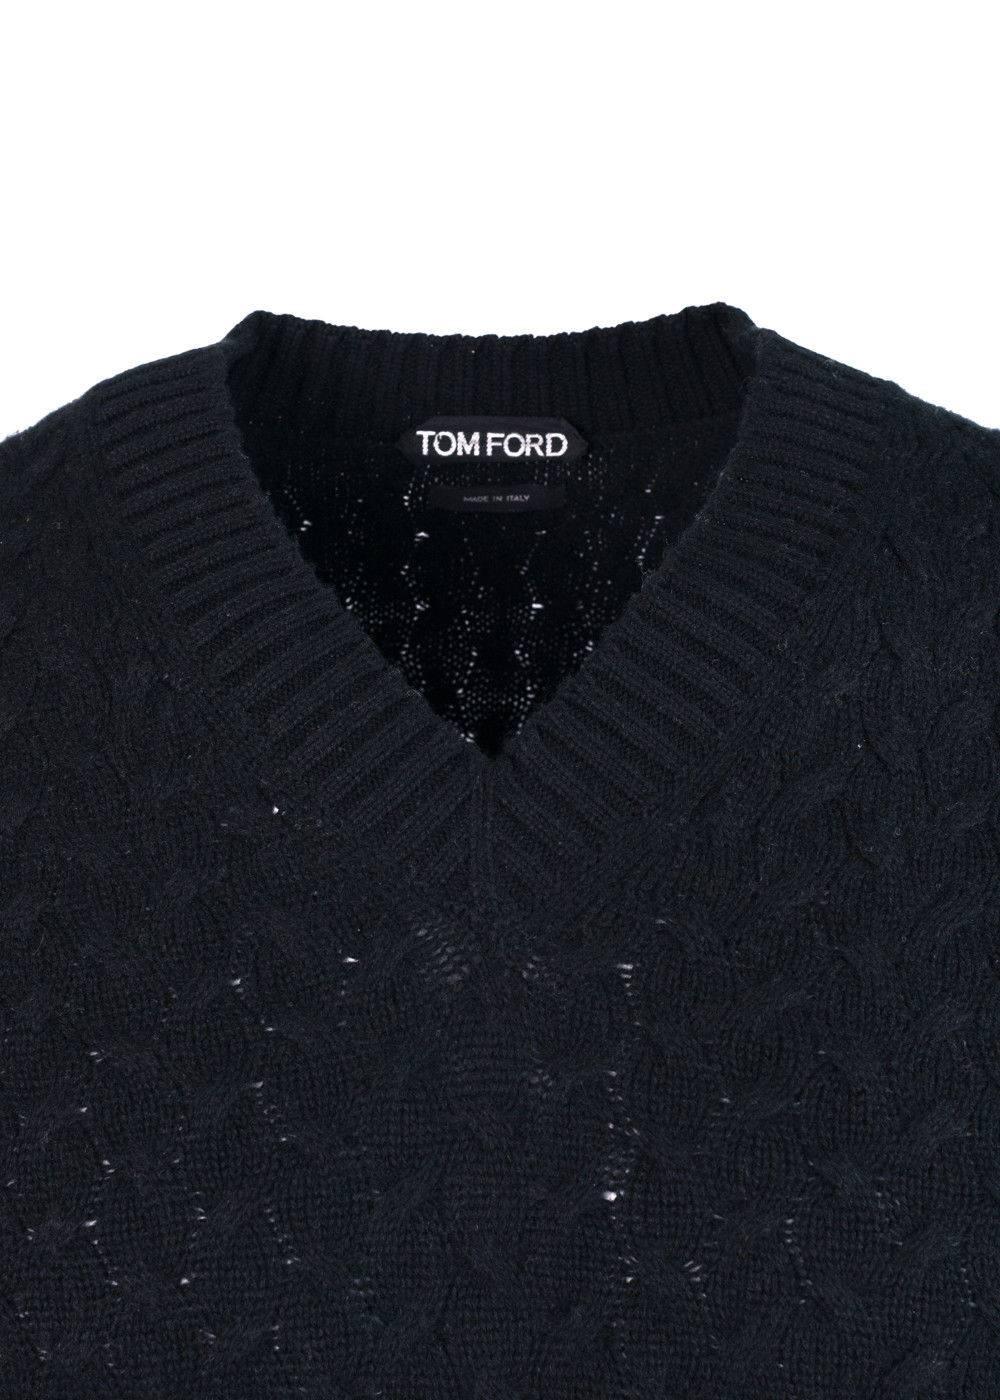 Brand New Tom Ford Cable Knit Sweater
Original with Tags 
Retails in Stores & Online for $750
Size USA Medium

Tom Ford's Thick Cable Knit Sweater will be the perfect wardrobe addition. This cashmere blend sweater features an unconventional curved